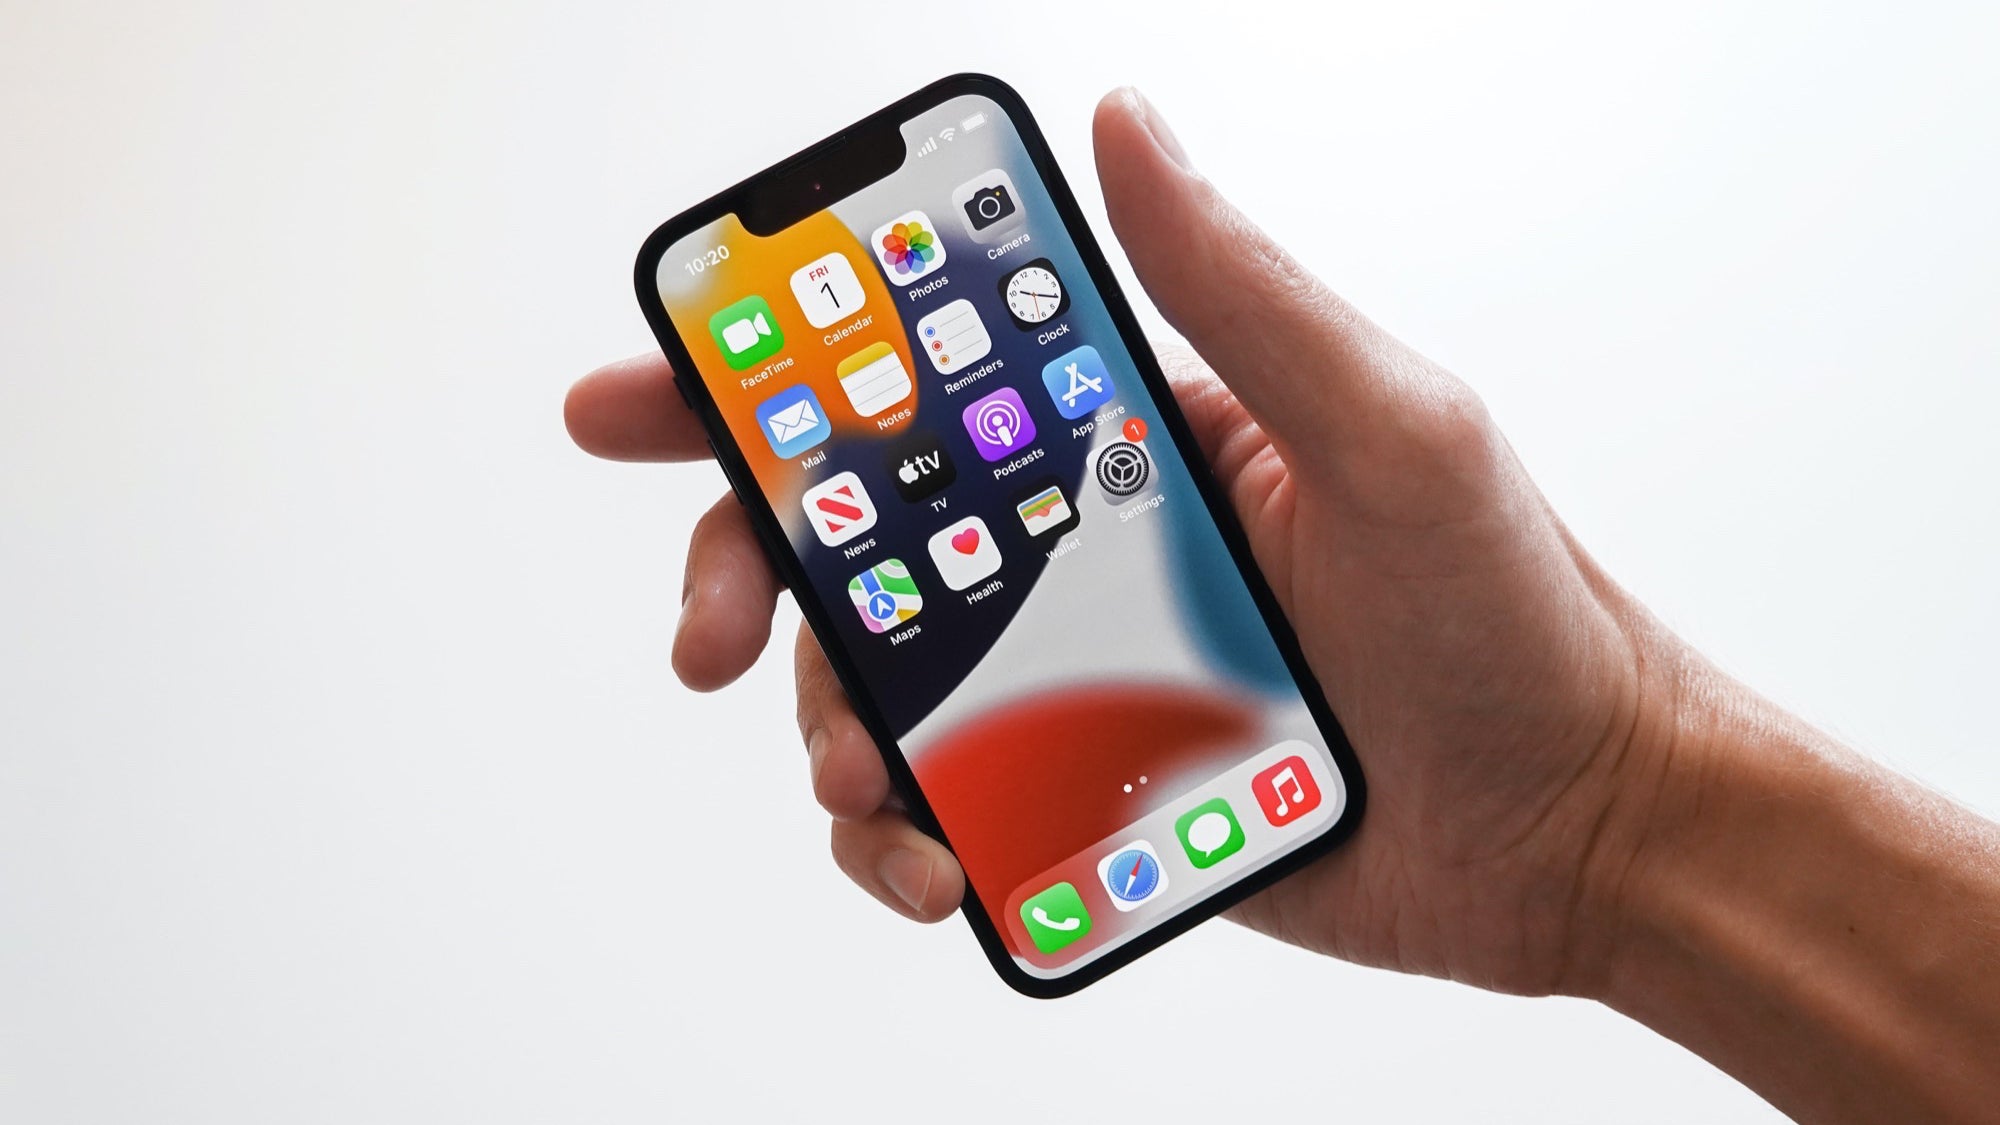 The iPhone mini from Apple comes with maximum endurance.  iPhone 14 Pro Max with 5000 mAh battery will be the end of the Android vs Apple battery debate